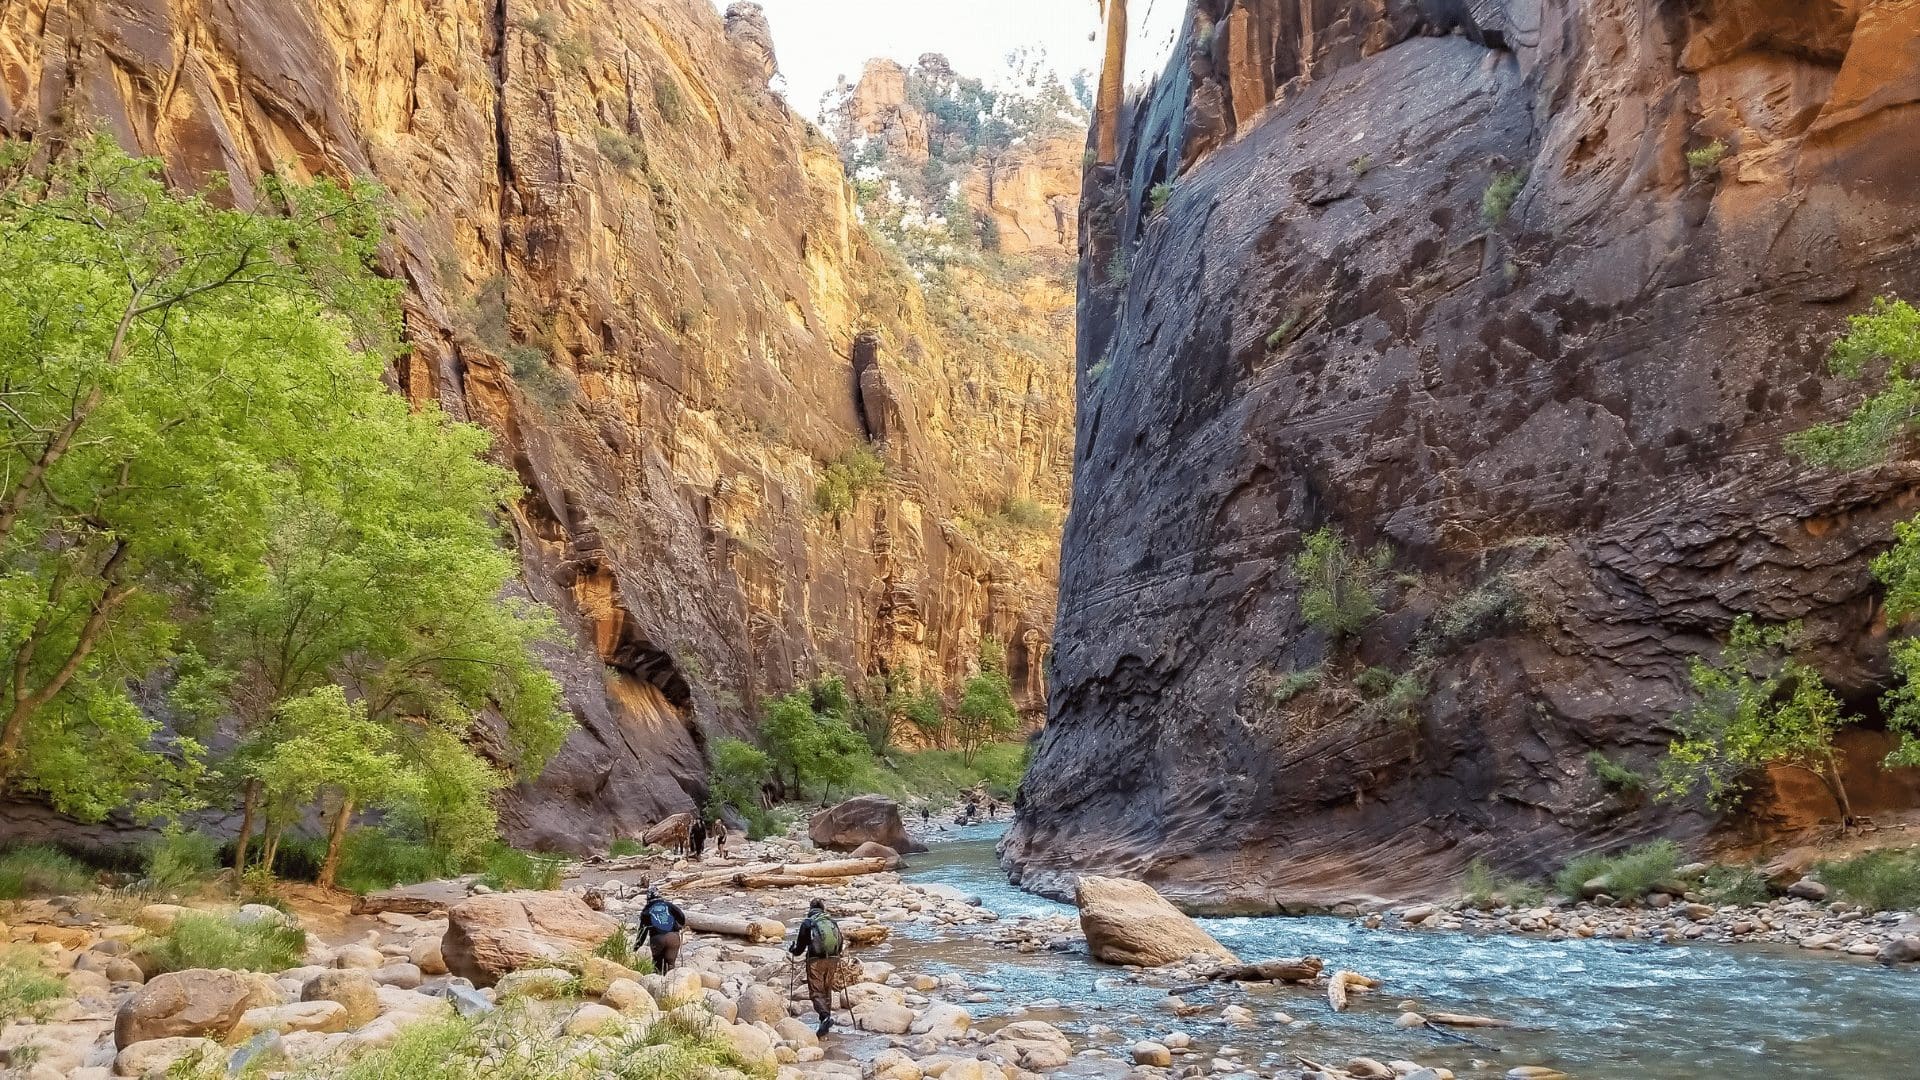 Backpacking near a river during a weekend hiking and glamping in Zion National Park.